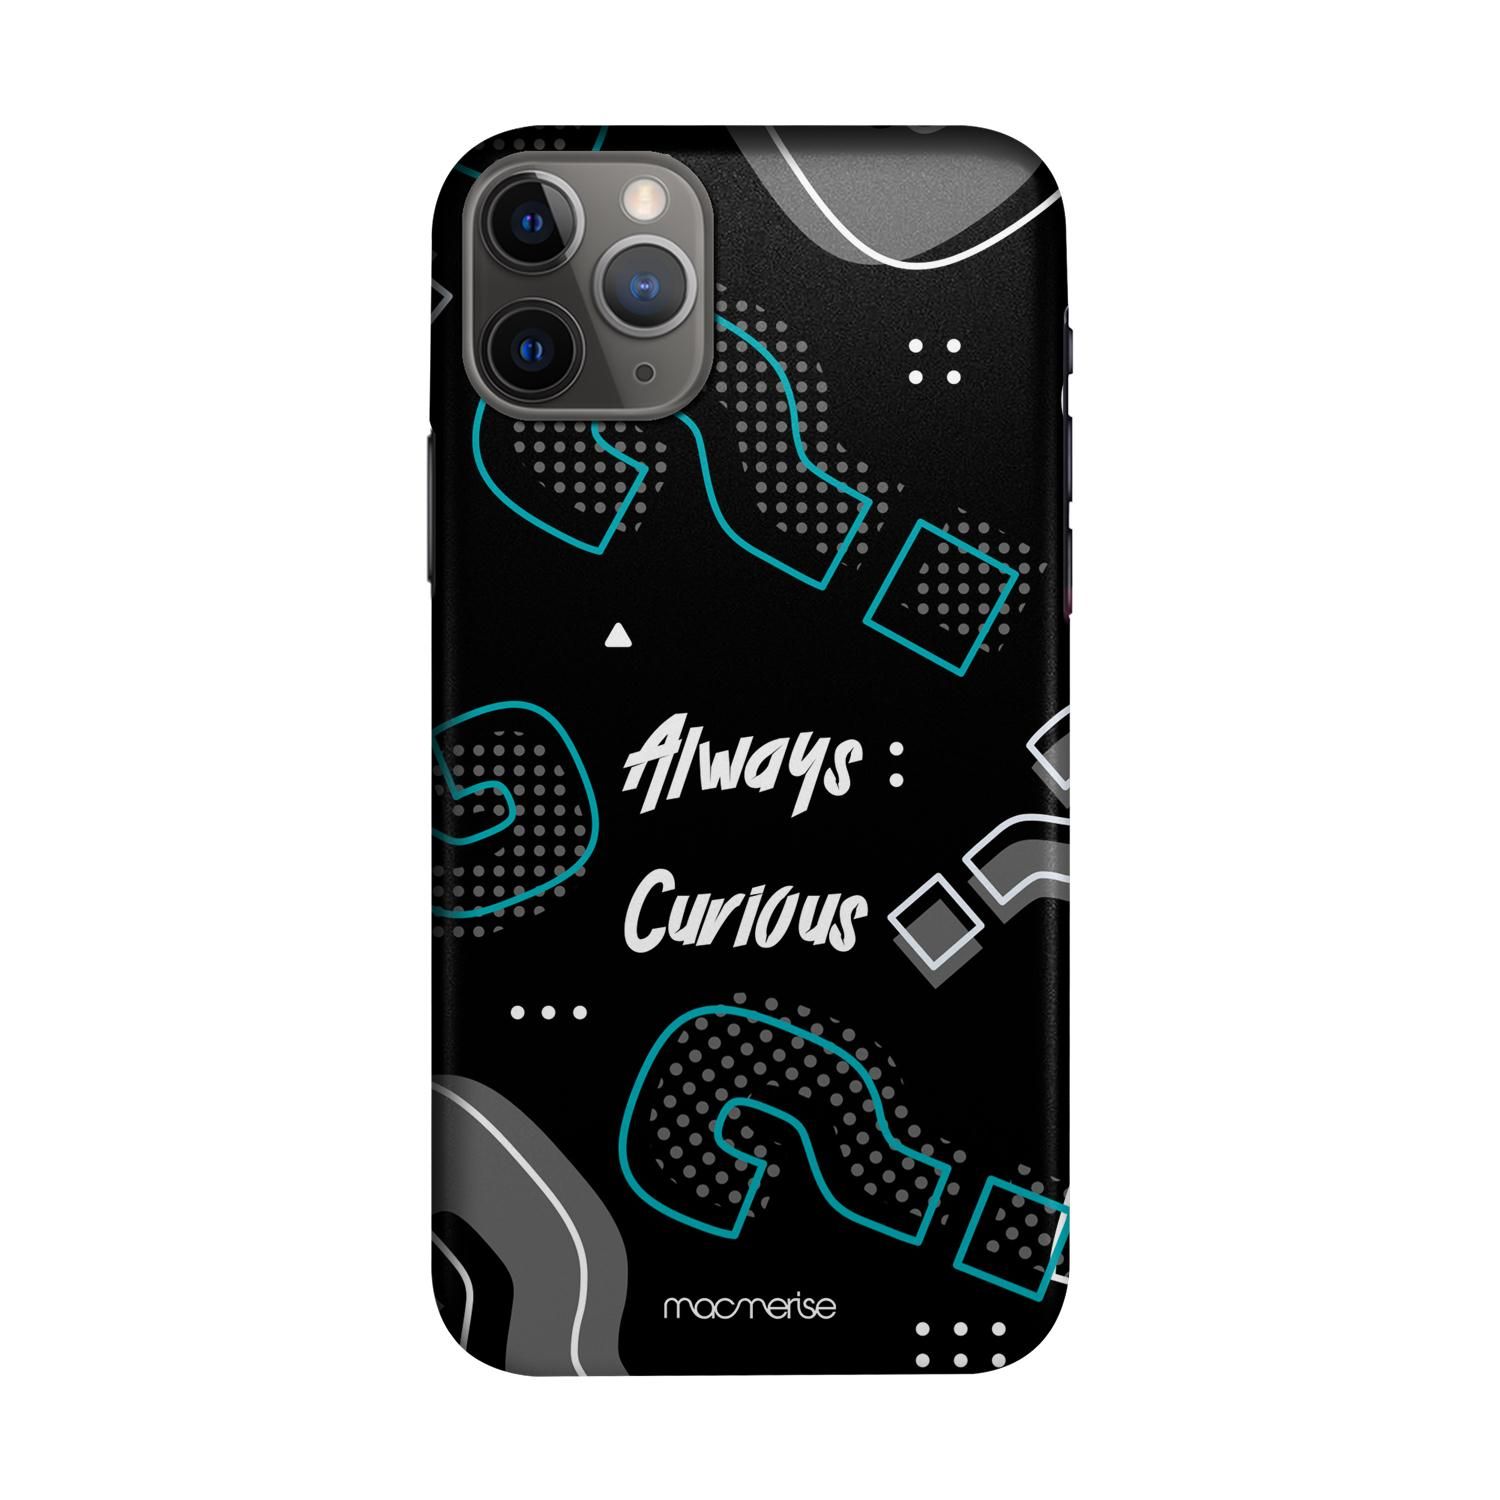 Buy Always Curious - Sleek Phone Case for iPhone 11 Pro Max Online